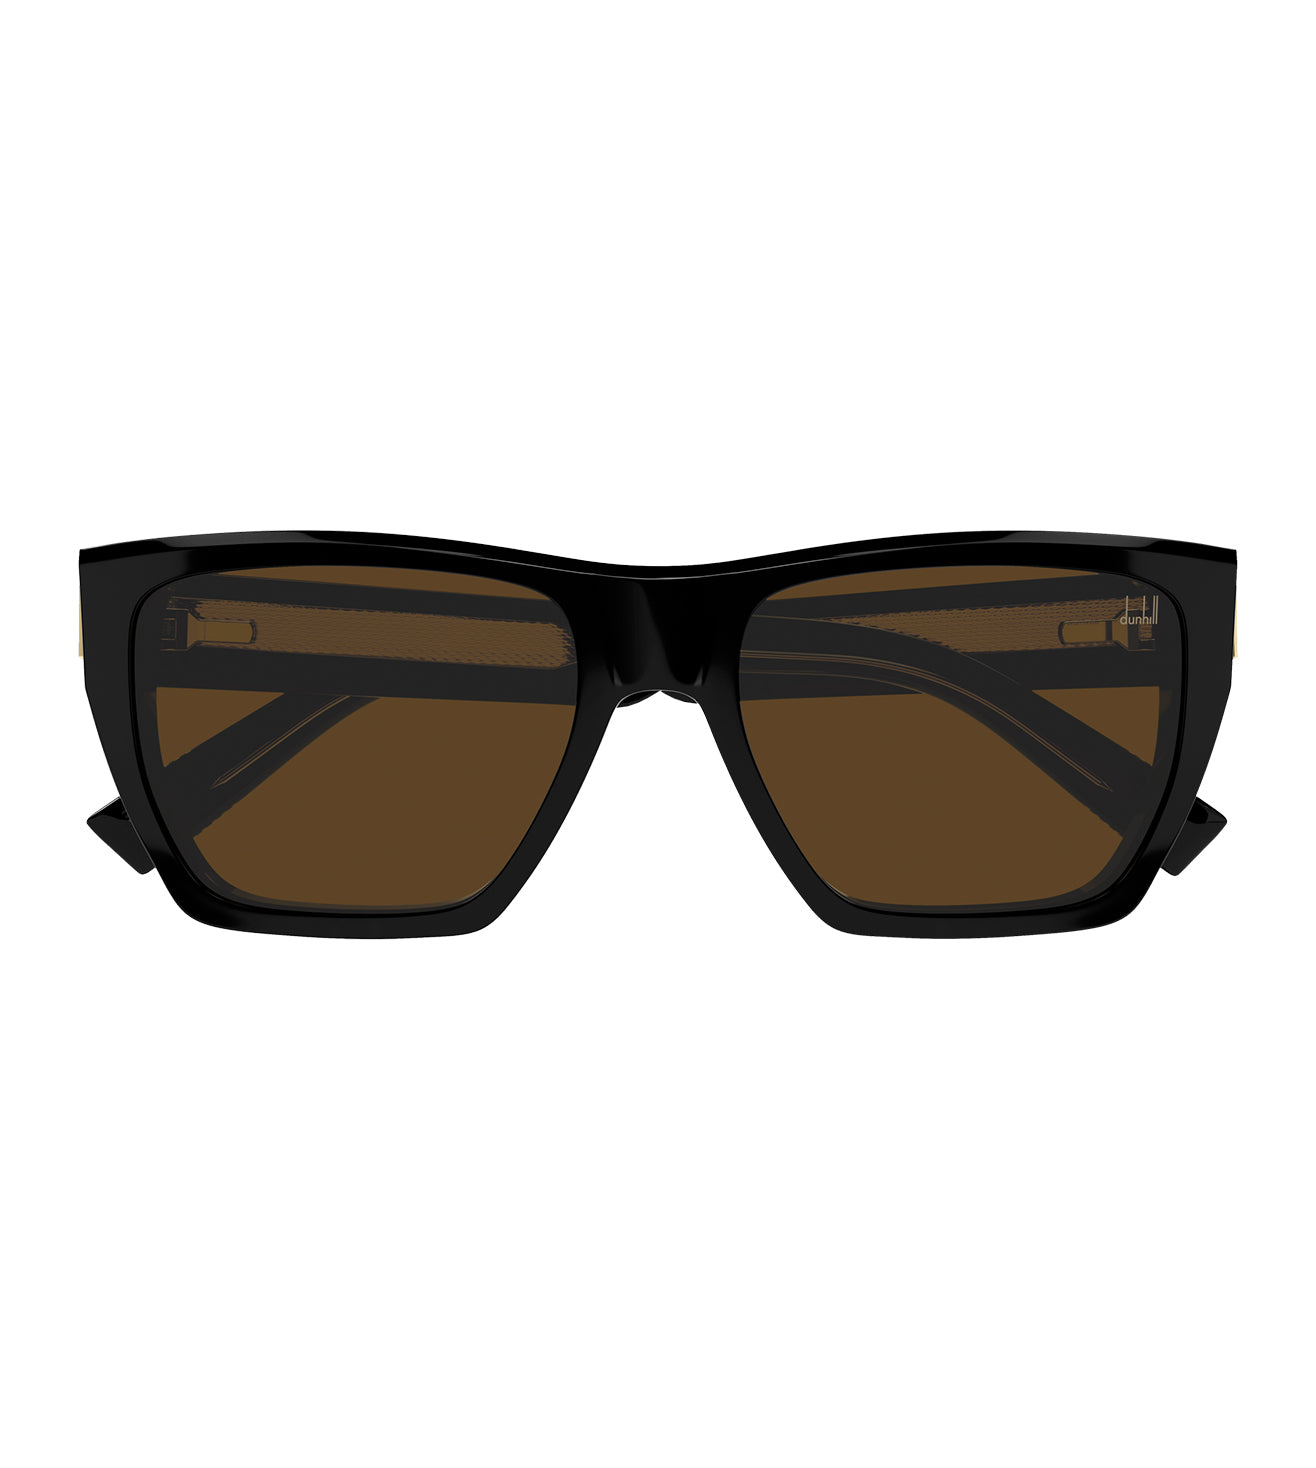 Dunhill Men's Brown Square Sunglass